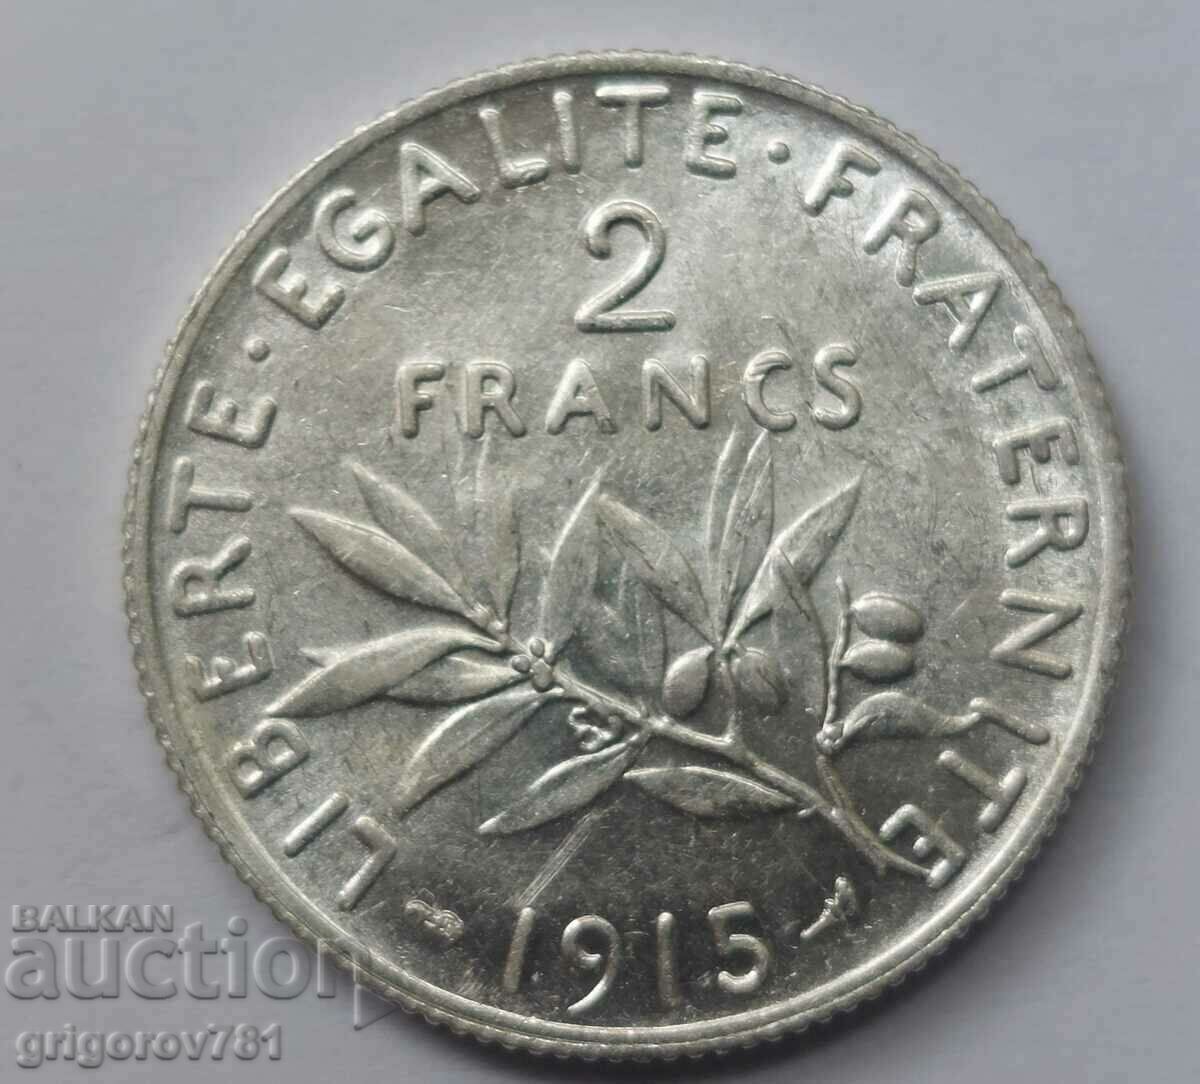 2 Francs Silver France 1915 - Silver Coin #59